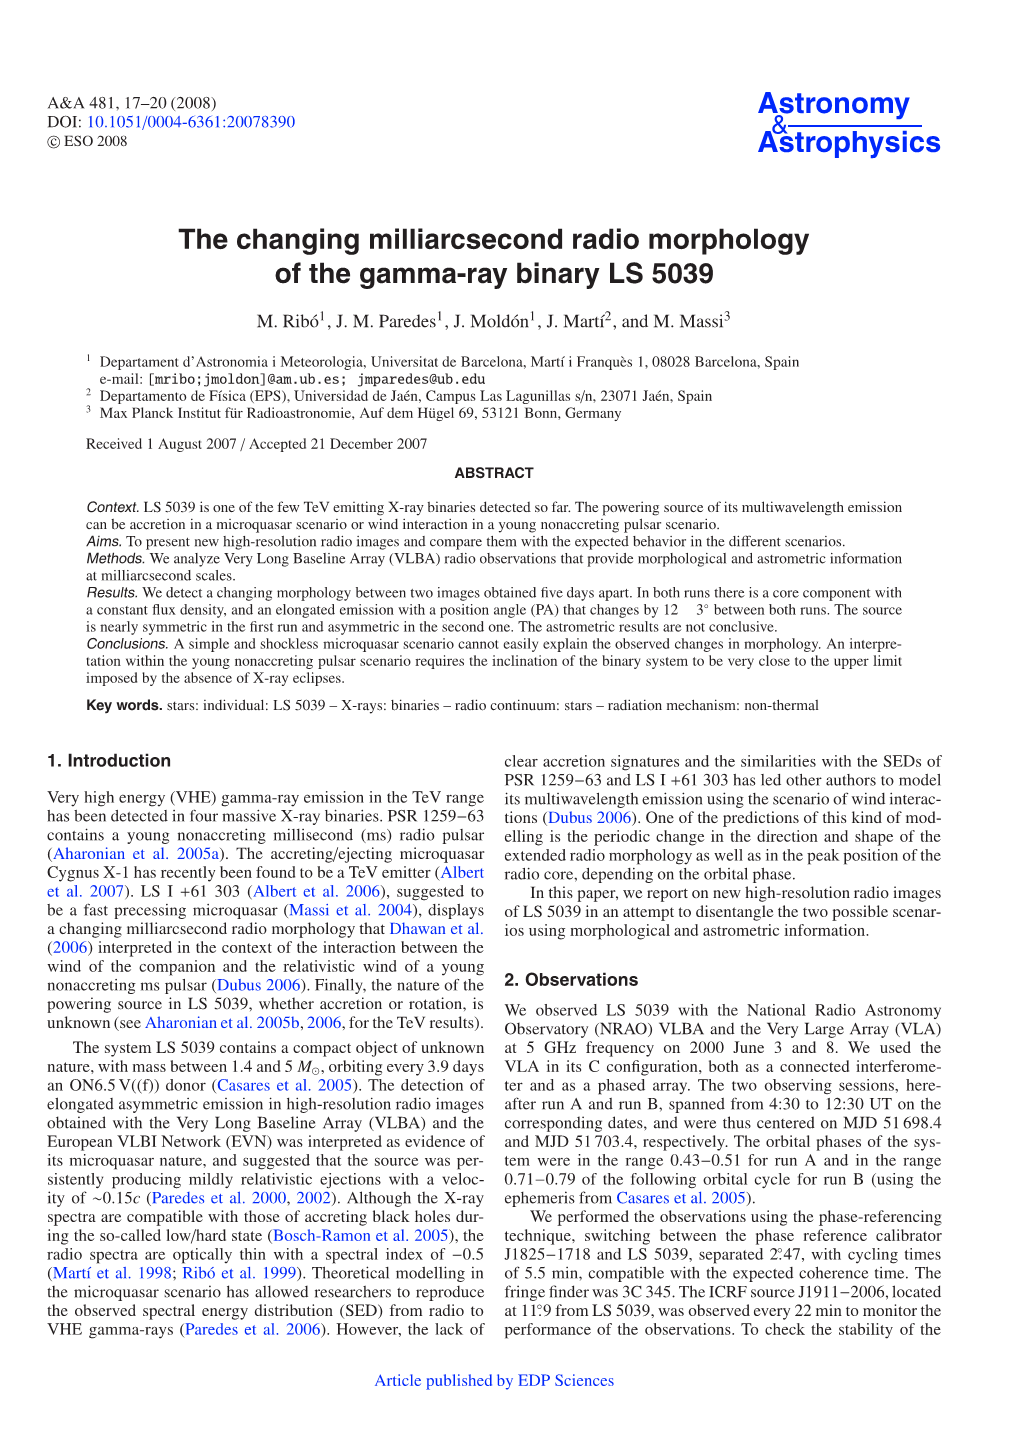 The Changing Milliarcsecond Radio Morphology of the Gamma-Ray Binary LS 5039